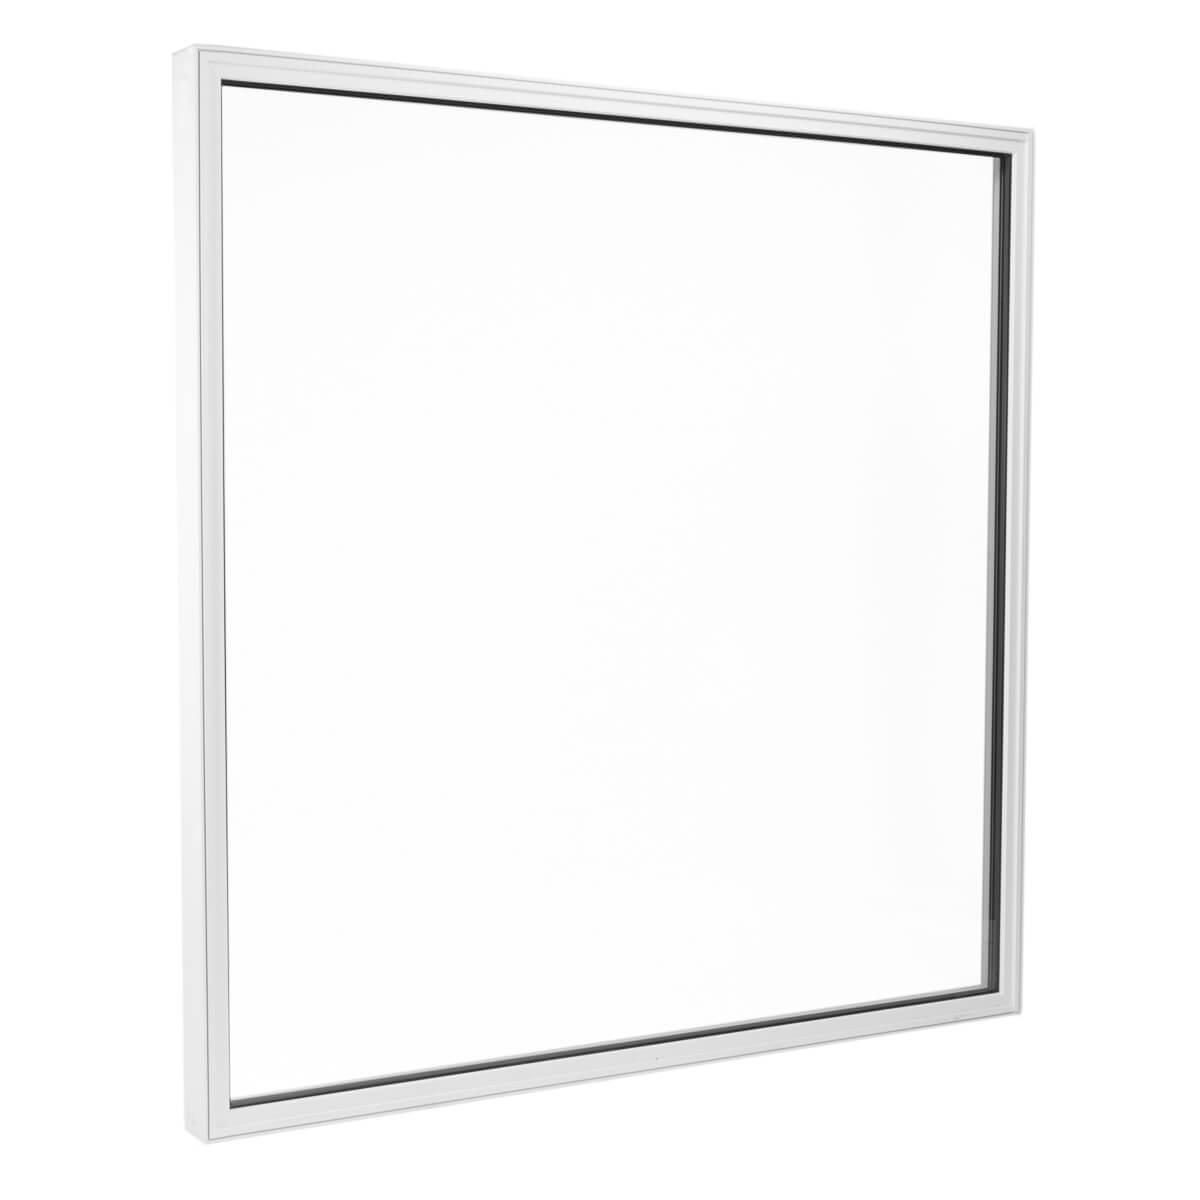 Custom Made Fixed Picture Window on a White Background